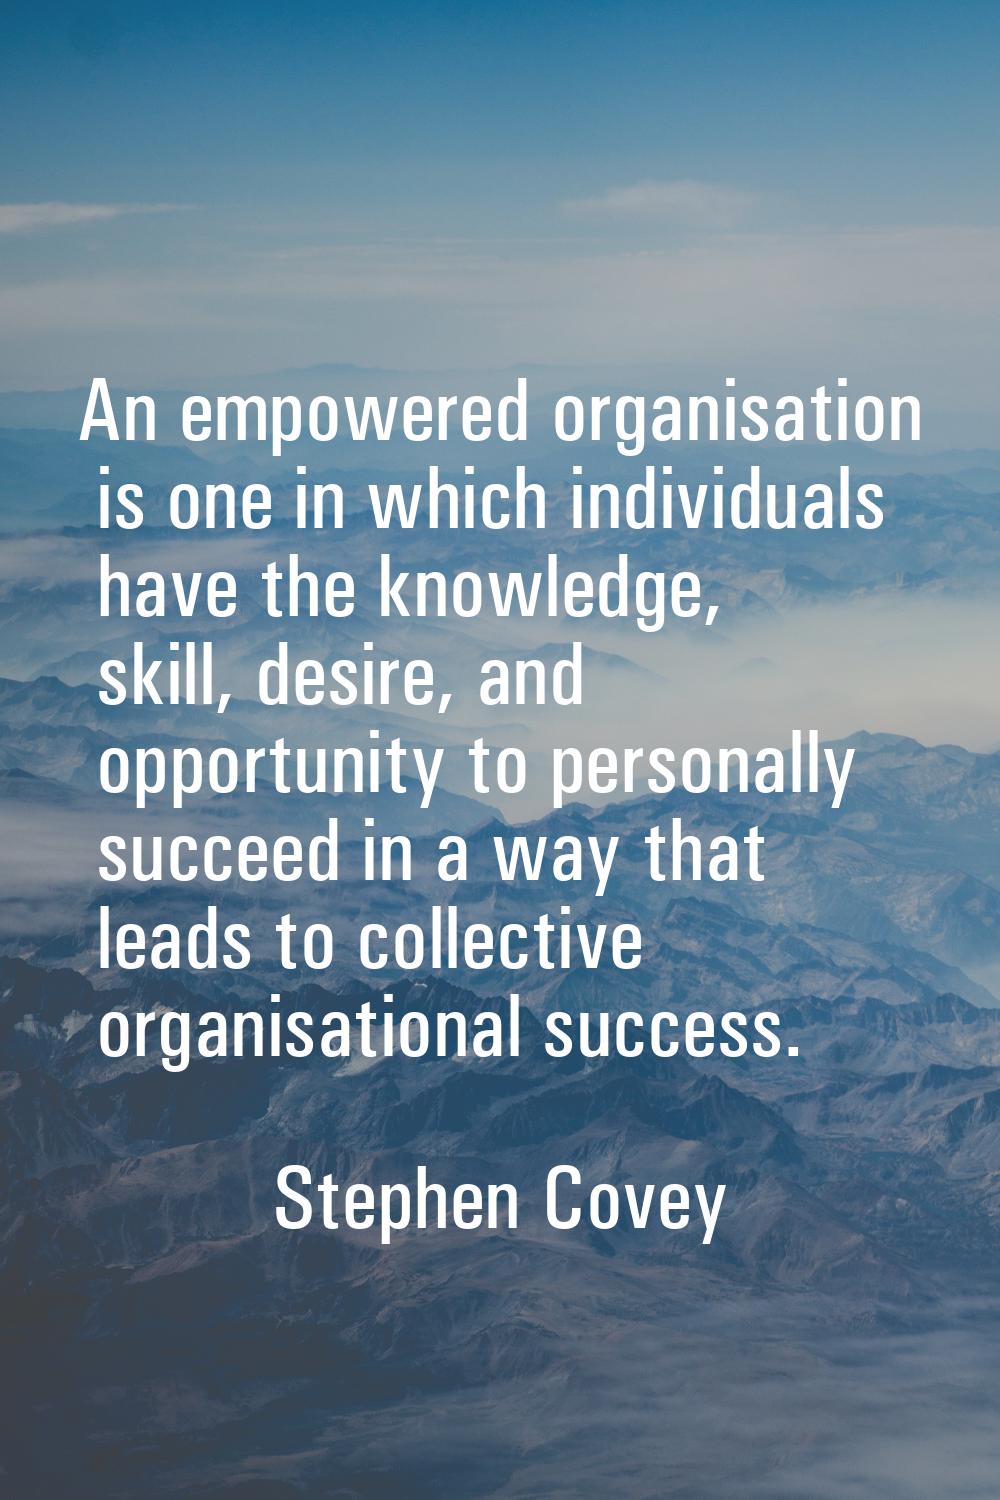 An empowered organisation is one in which individuals have the knowledge, skill, desire, and opport